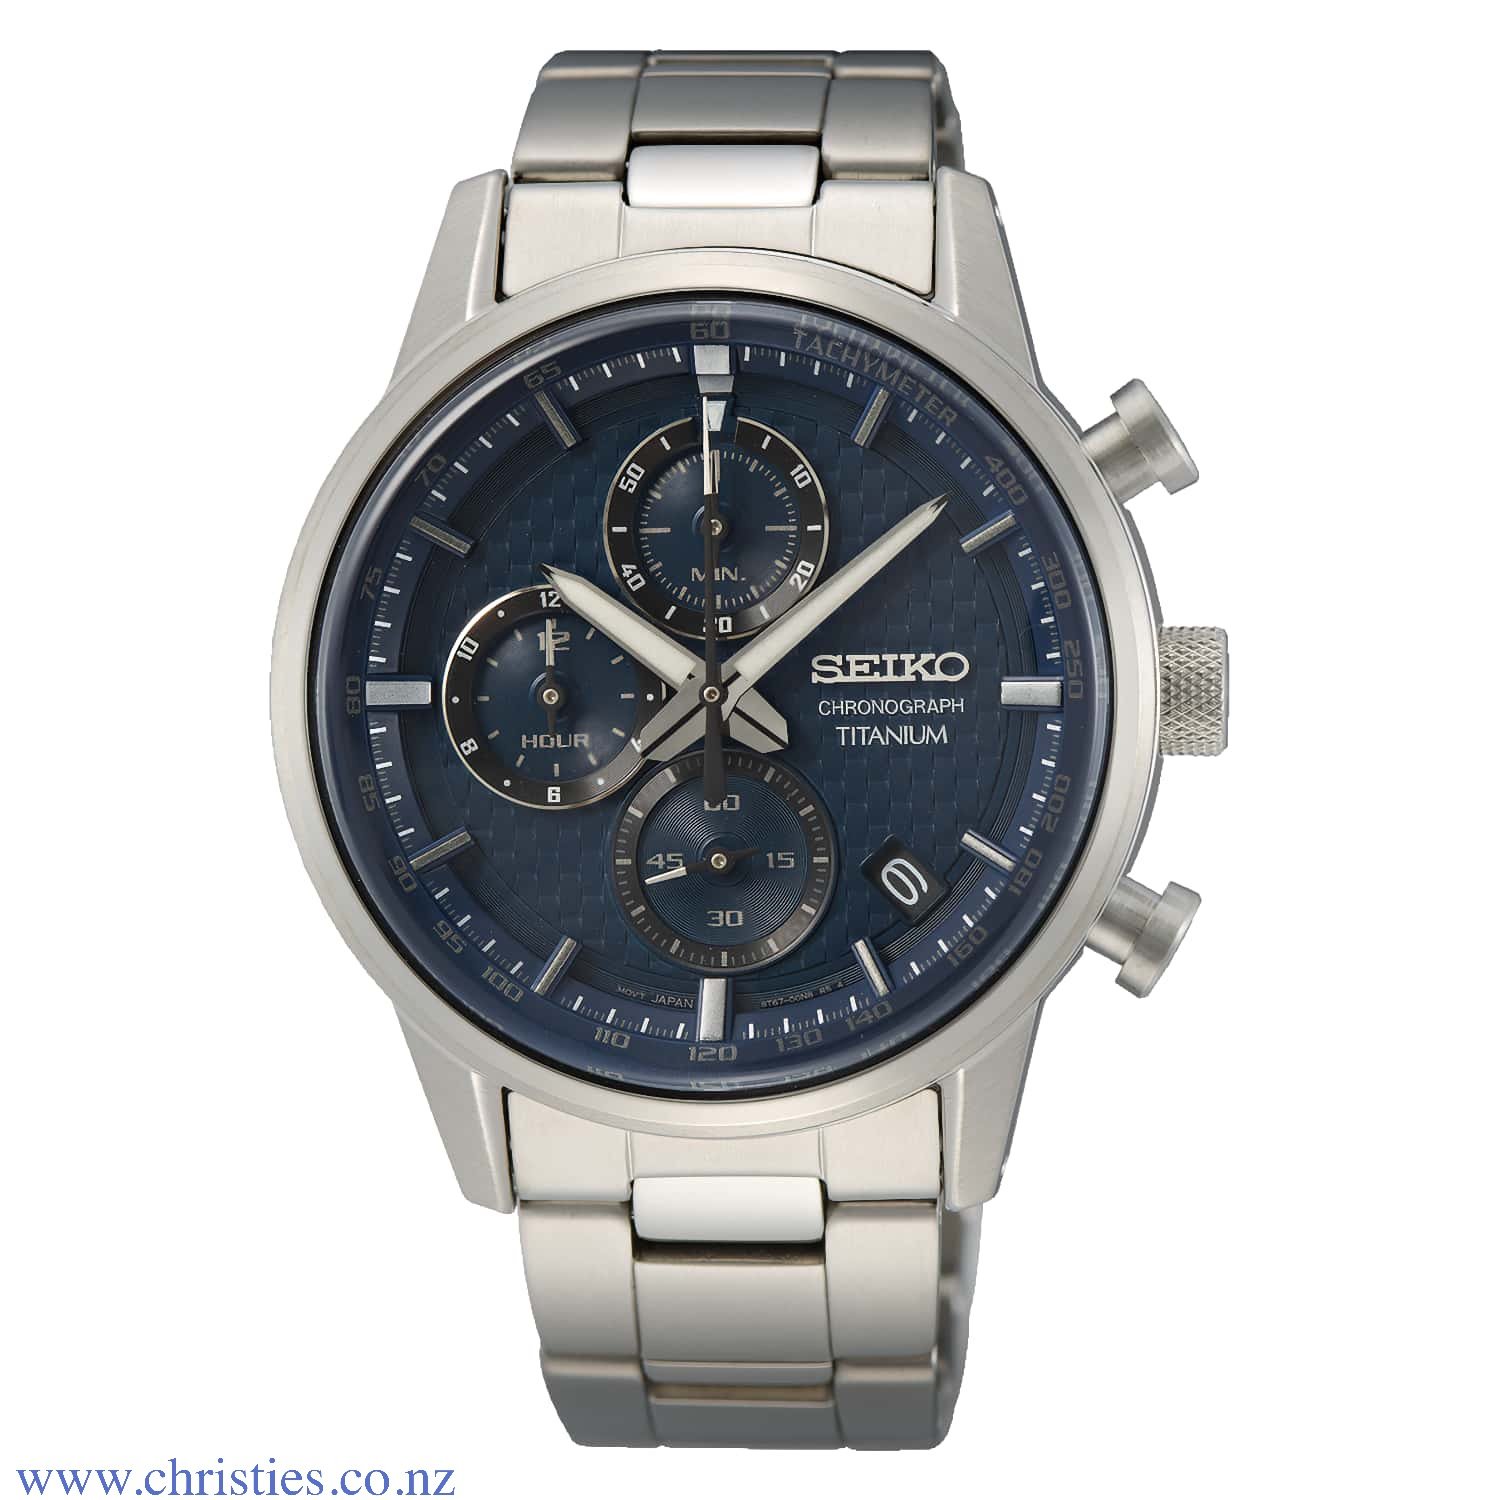 SSB387P1 Seiko Mens Chronograph Titanium Watch. SSB387P1 Seiko Mens Chronograph Titanium Watch Afterpay - Split your purchase into 4 instalments - Pay for your purchase over 4 instalments, due every two weeks. You’ll pay your first installment at the time